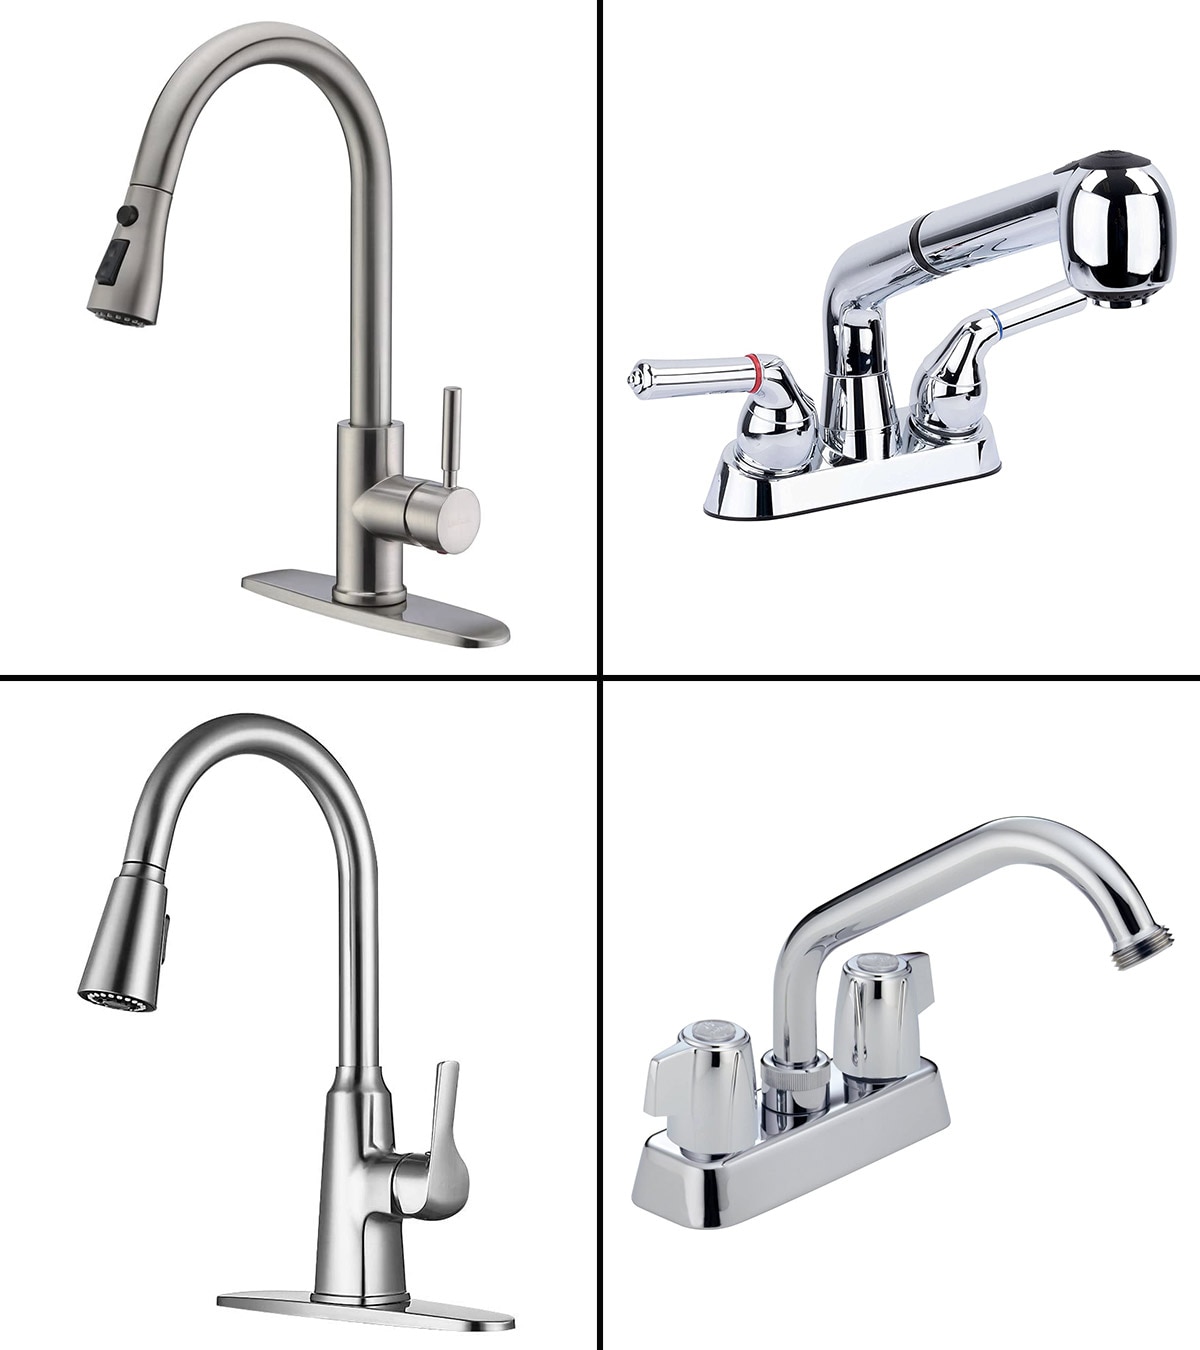 11 Best Utility Sink Faucets For Easy Washing, Interior Designer-Approved